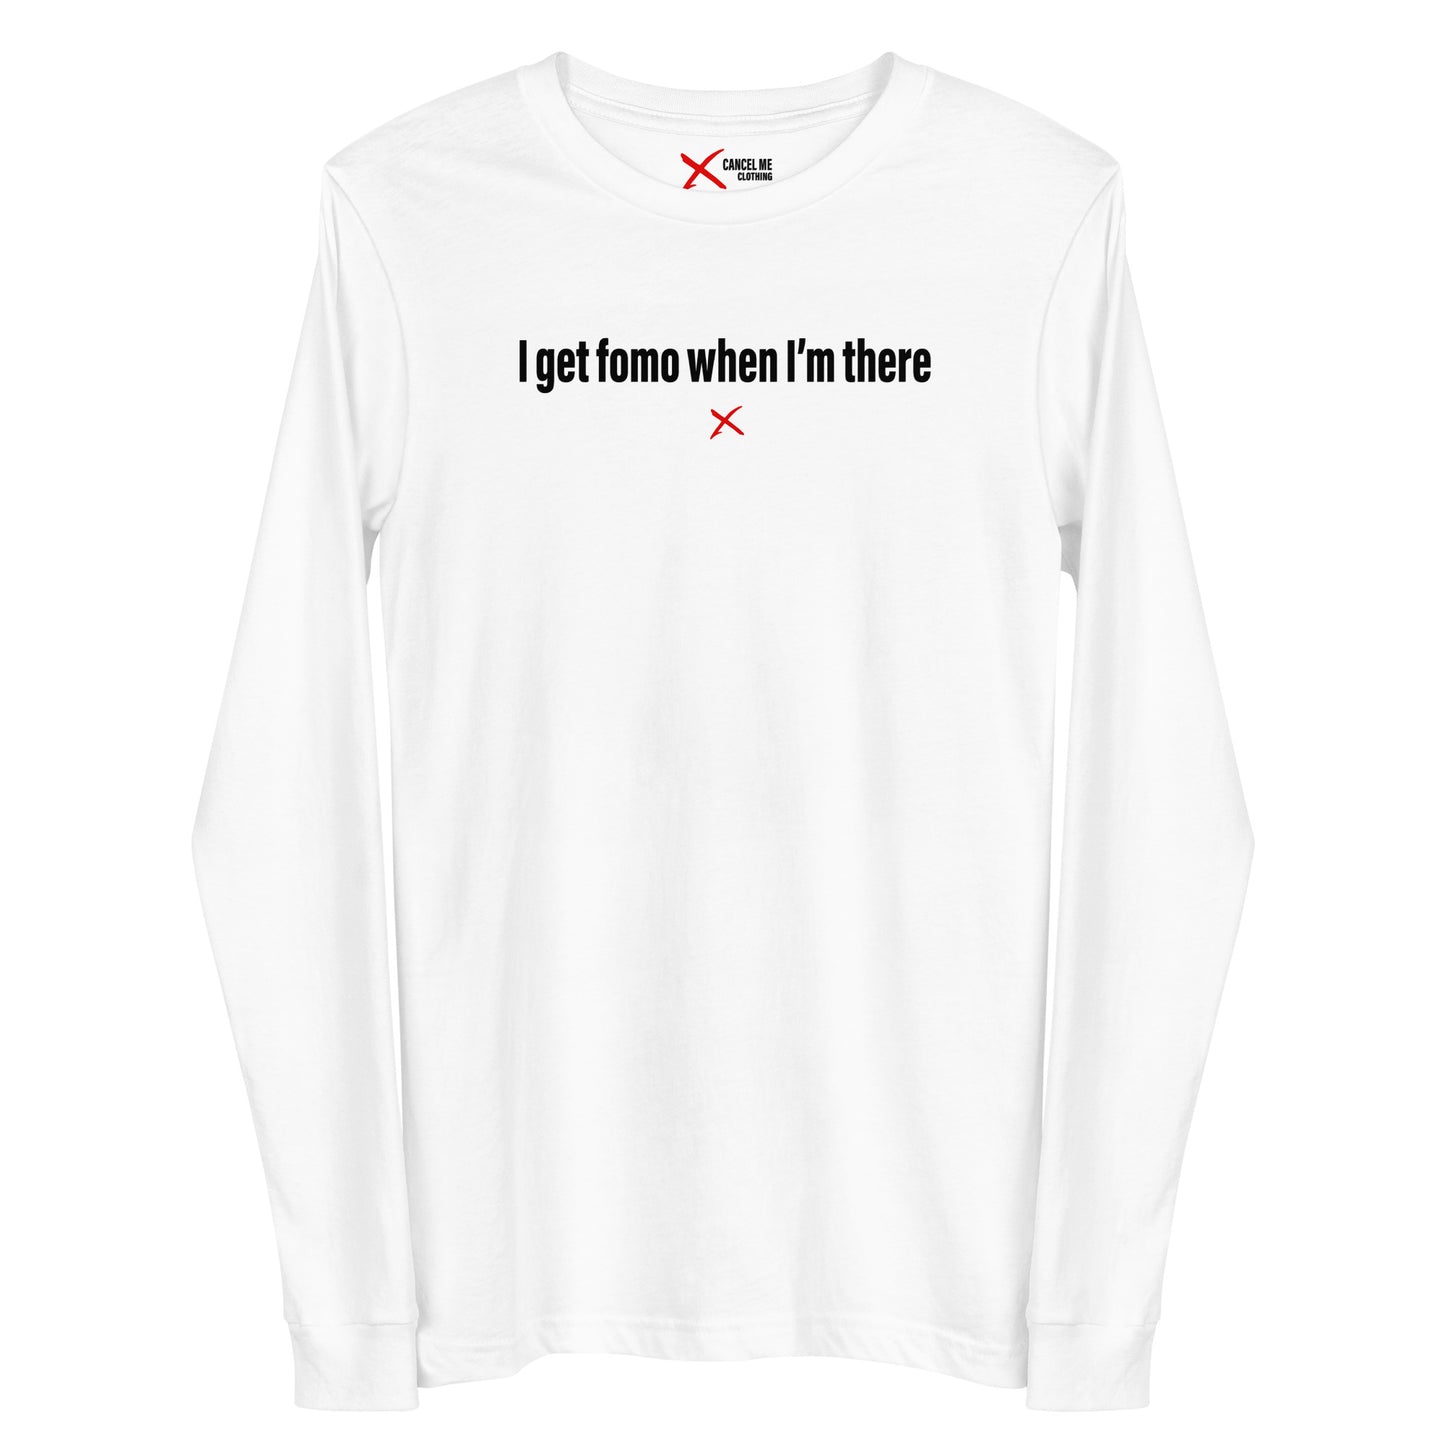 I get fomo when I'm there - Longsleeve